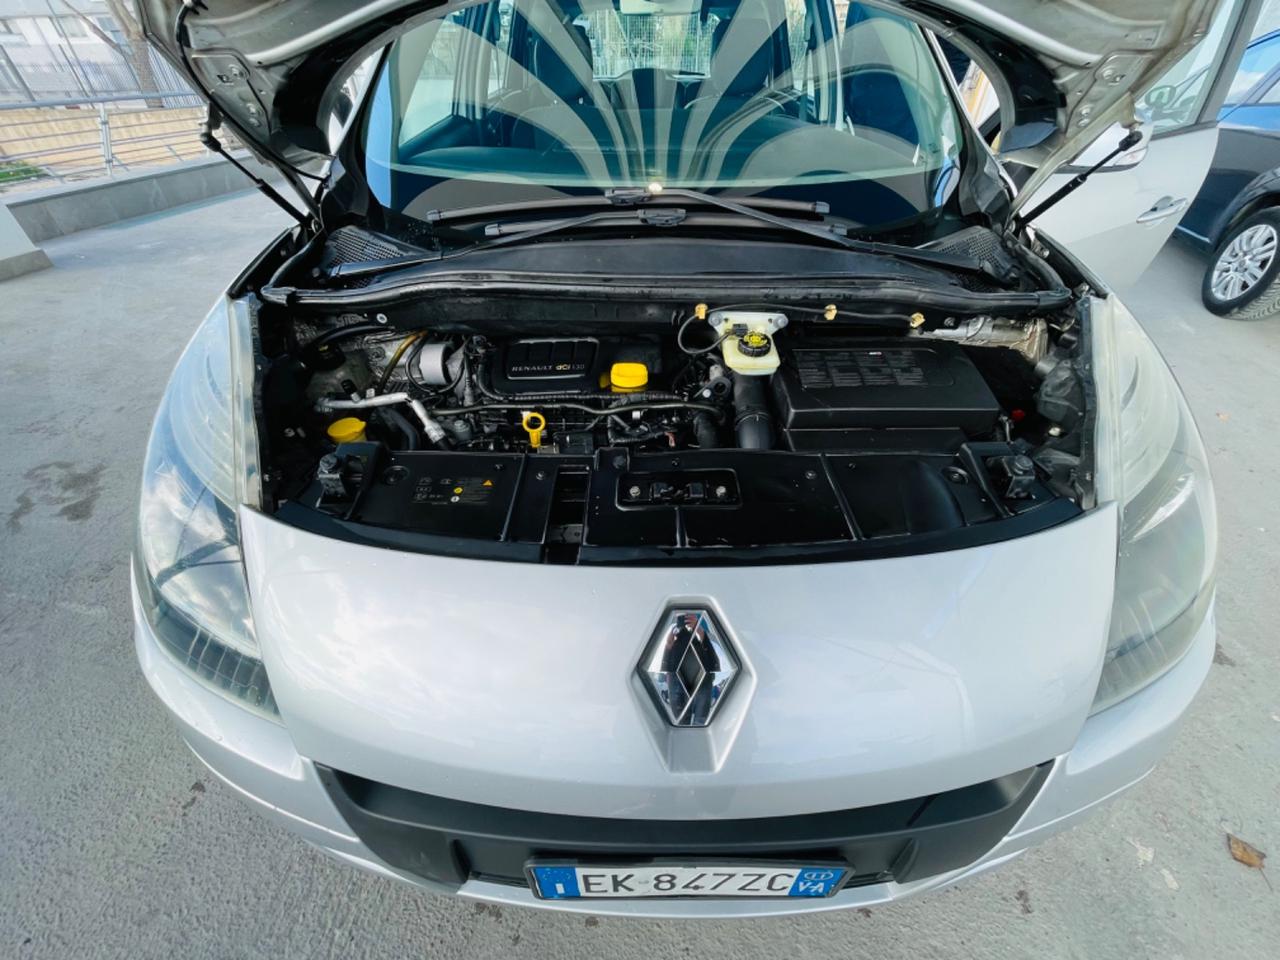 Renault Scenic Scénic X-Mod 1.6 dCi 130CV Luxe